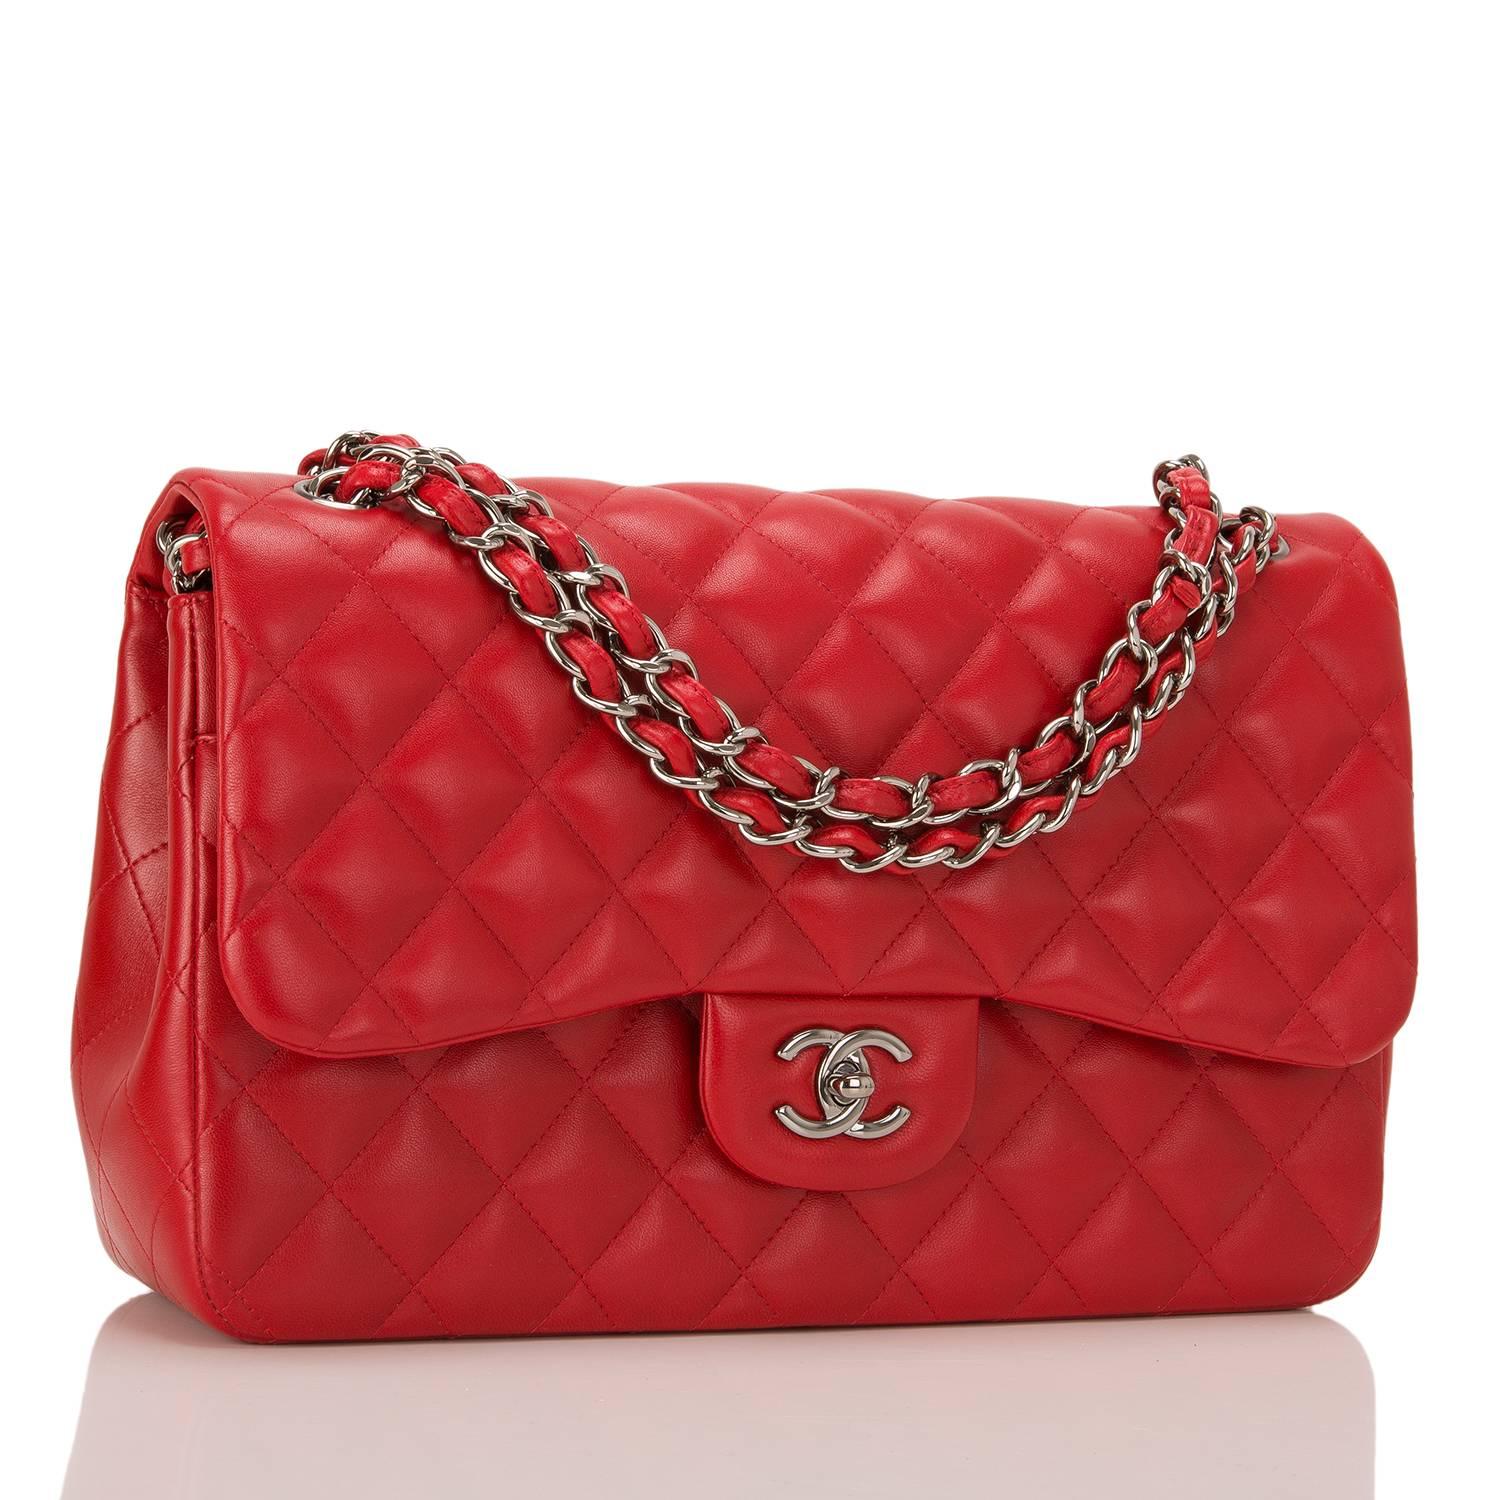 Chanel Jumbo Classic double flap bag of bright red quilted lambskin leather and ruthenium hardware features a front flap with signature CC turnlock closure, half moon back pocket, and an adjustable interwoven aged ruthenium chain link and red